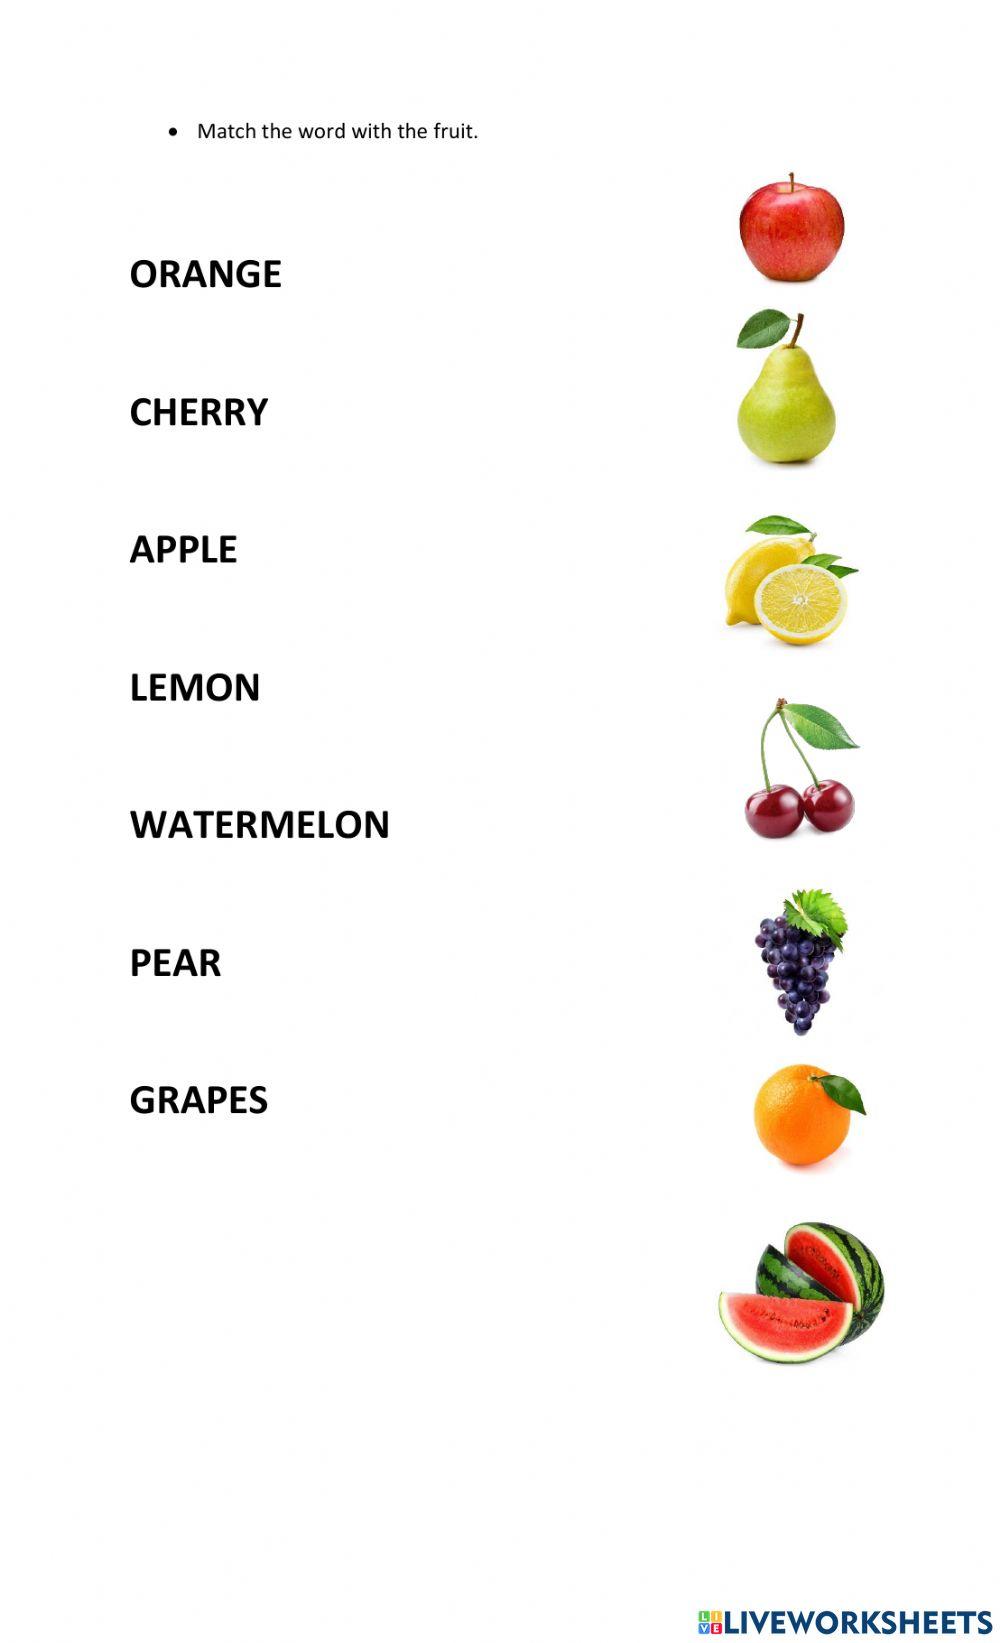 Match the word with the fruit